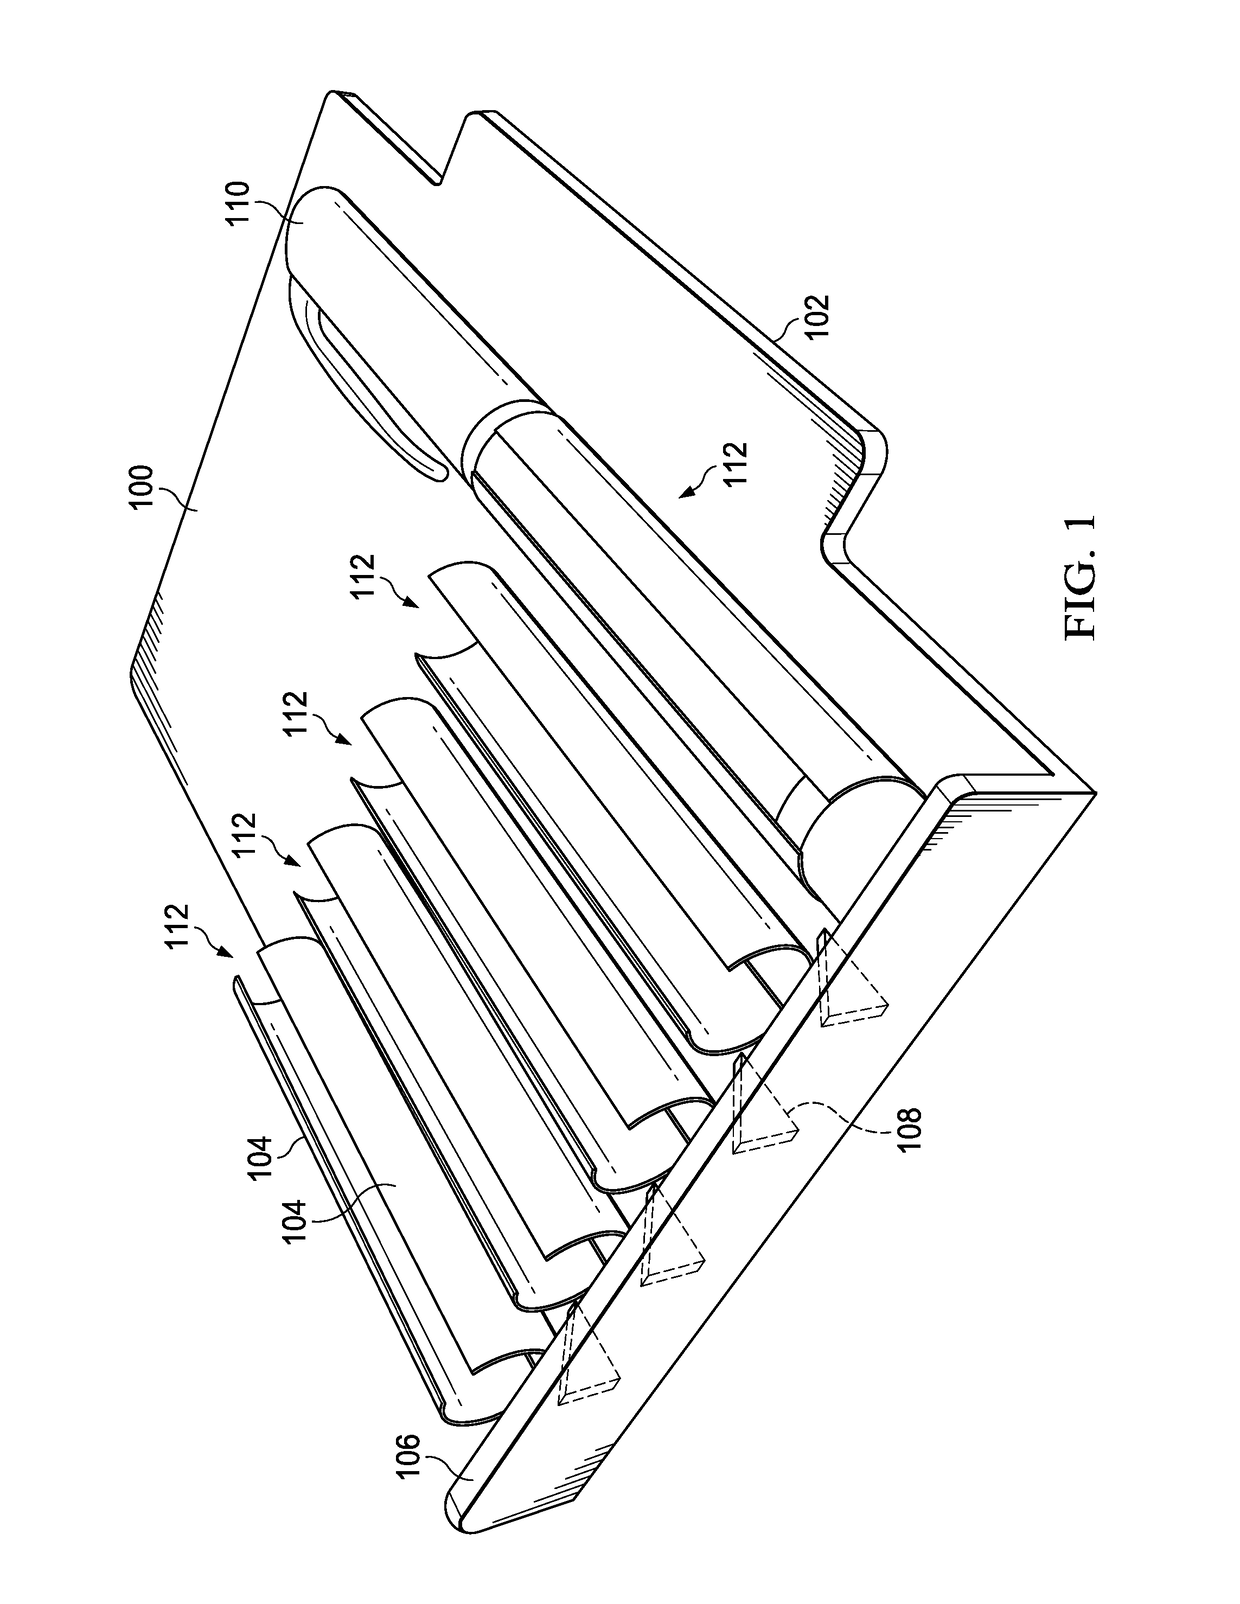 Insulin pen holder and storage device